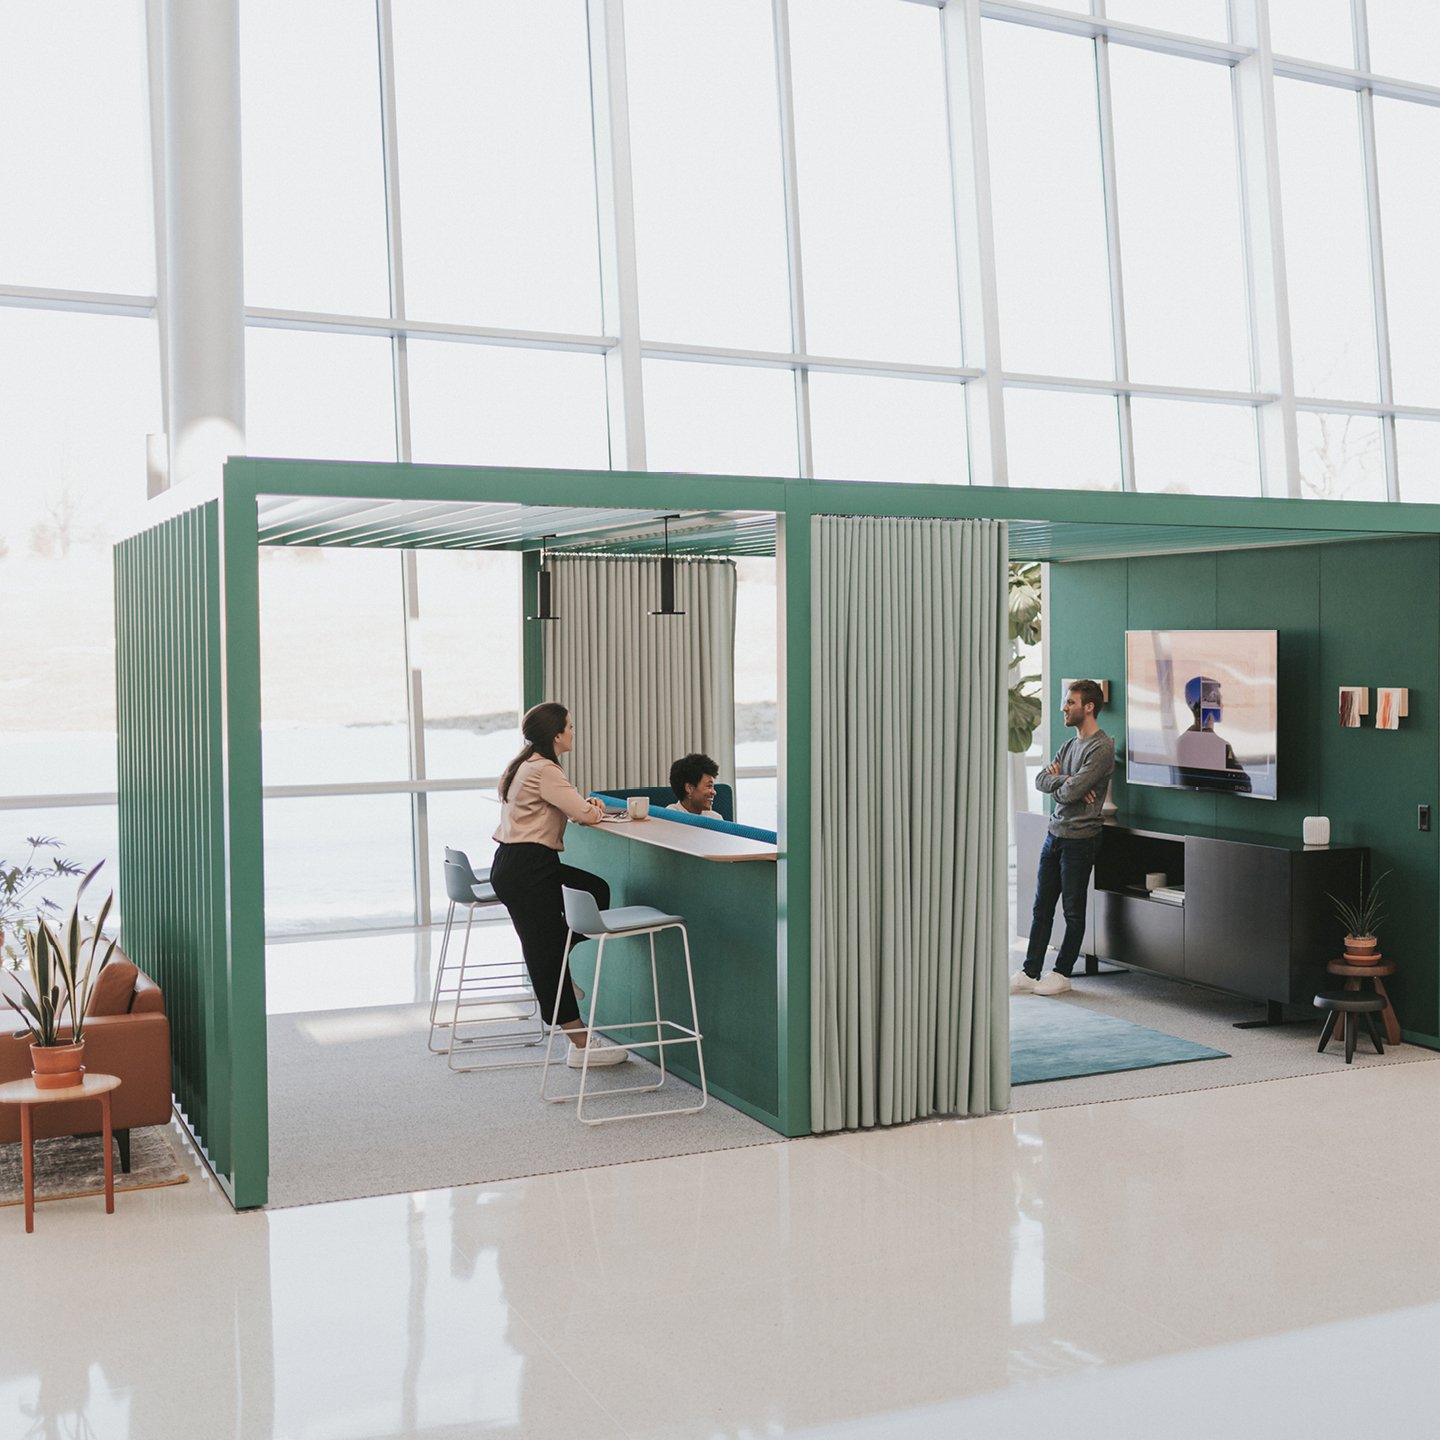 Haworth Pergola Workspace in green trim with green curtain with tall table on wall with employees working inside open office space